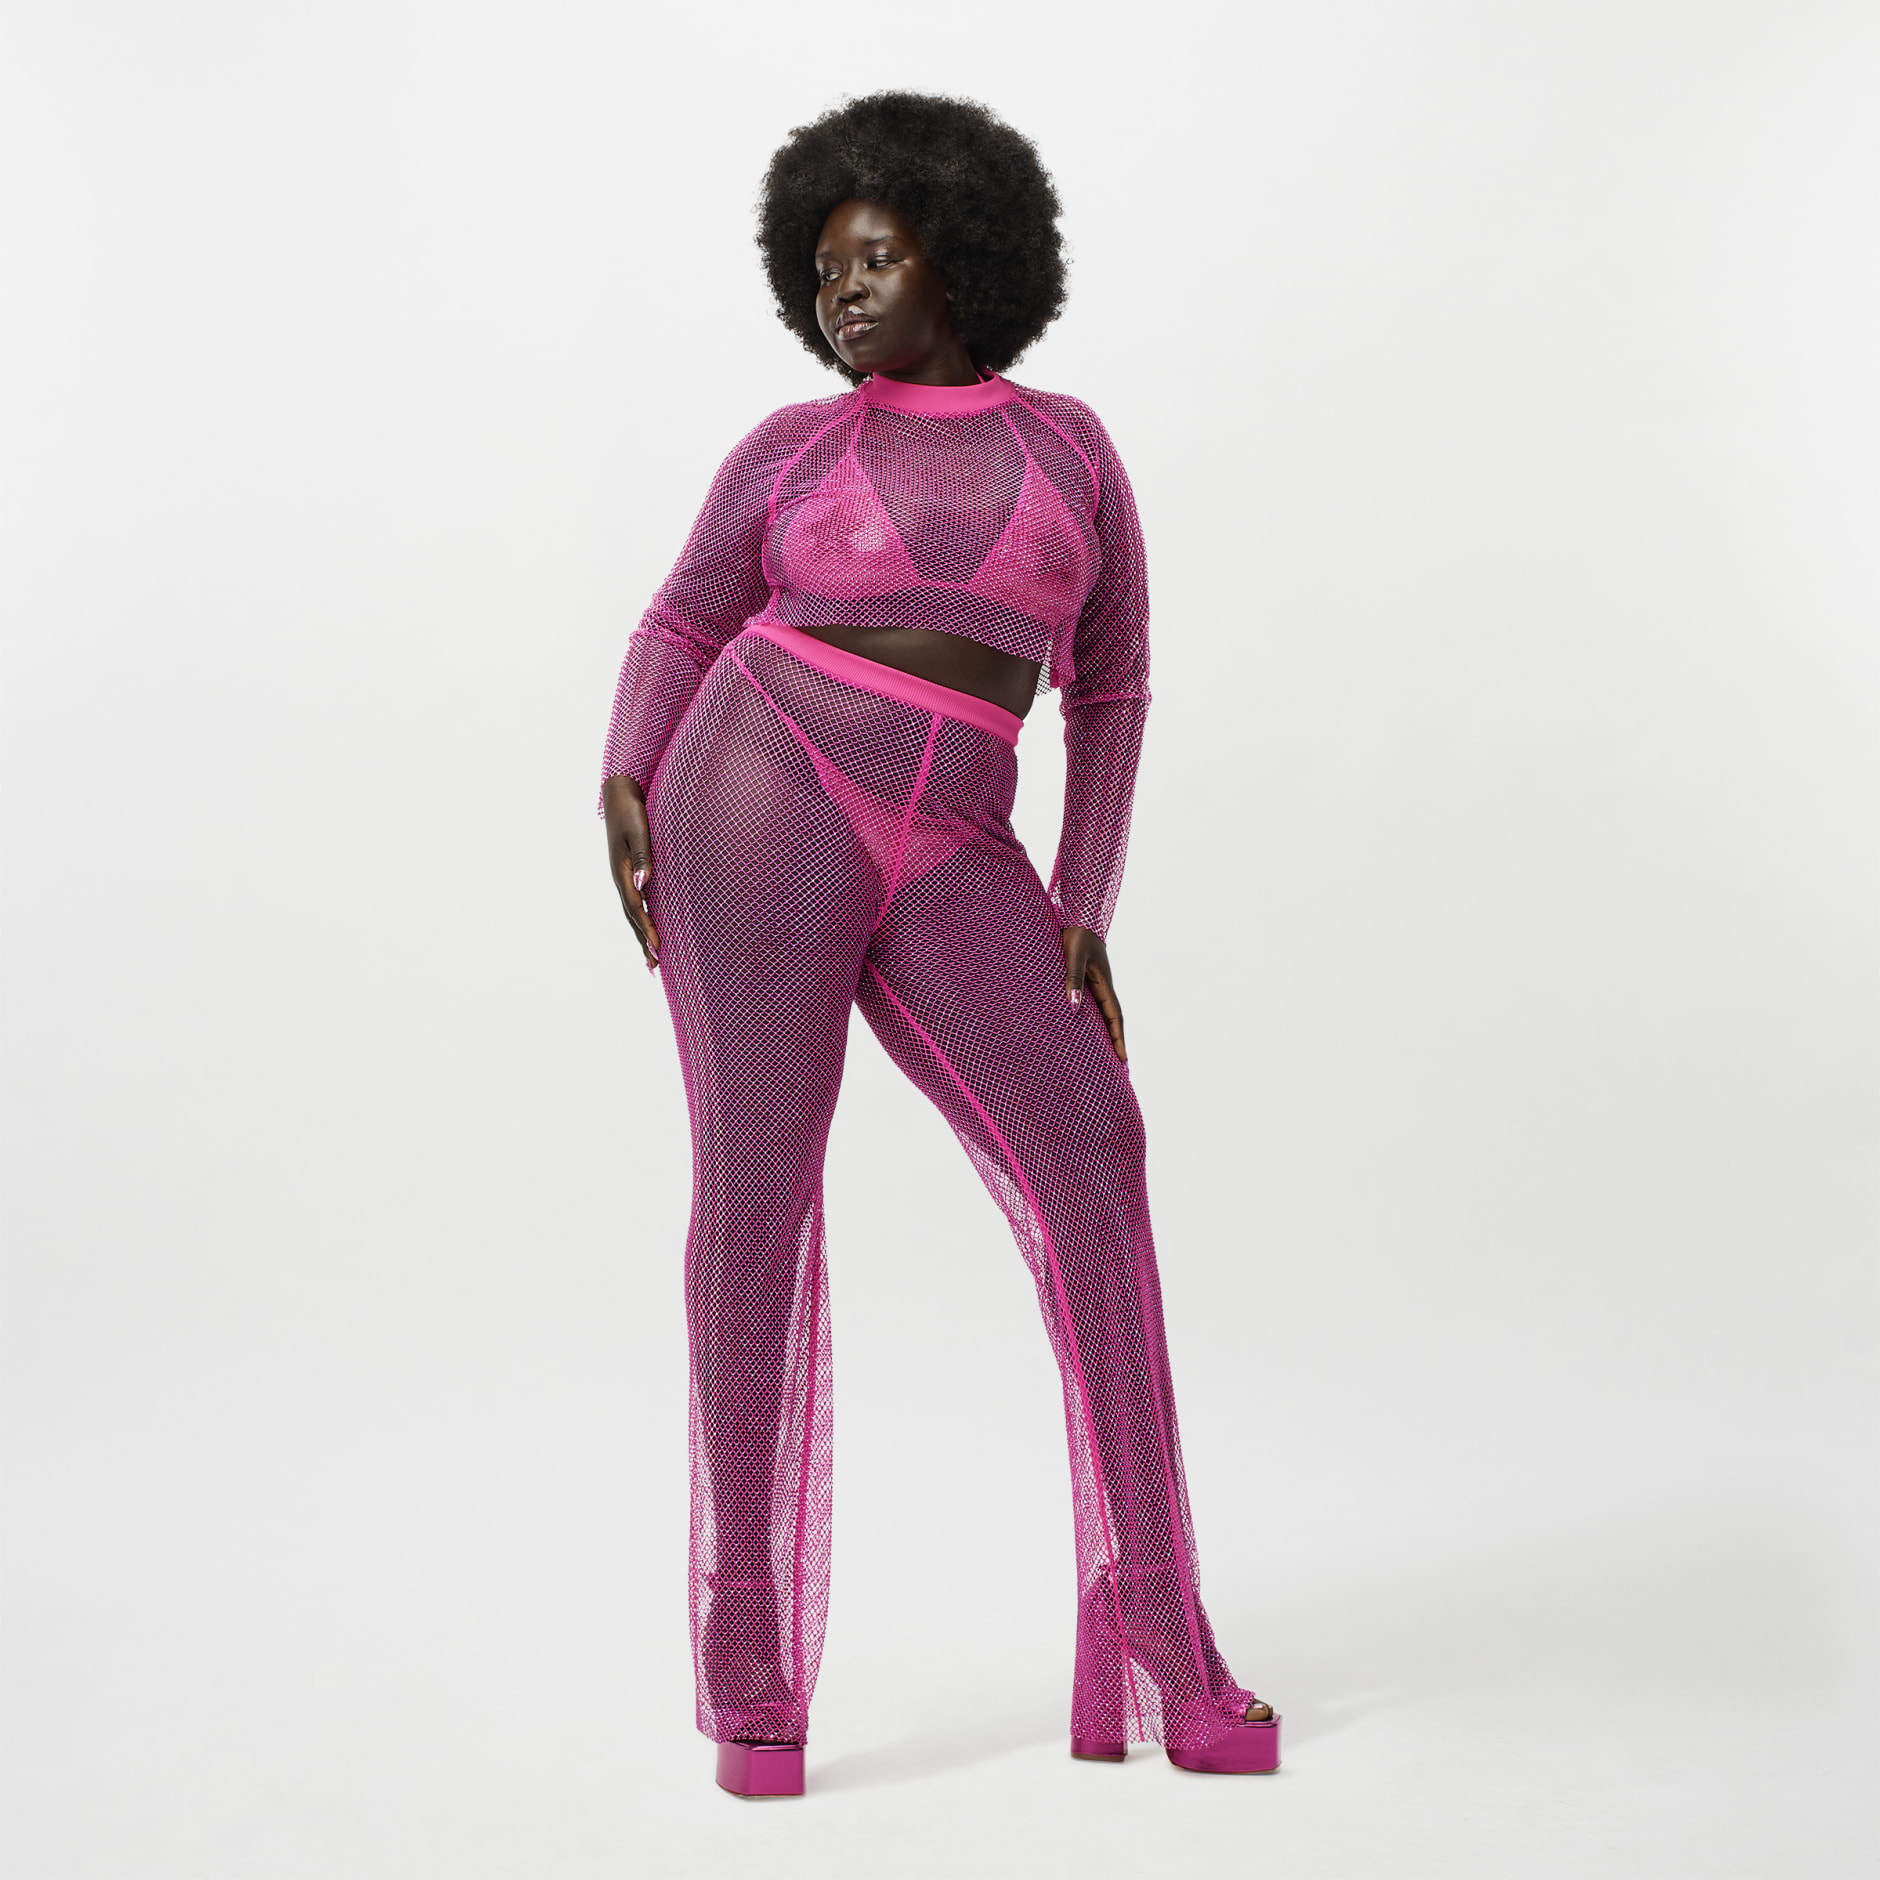 Women's Clothing - IVY PARK Crystal Mesh Cover-Up Pants - Pink